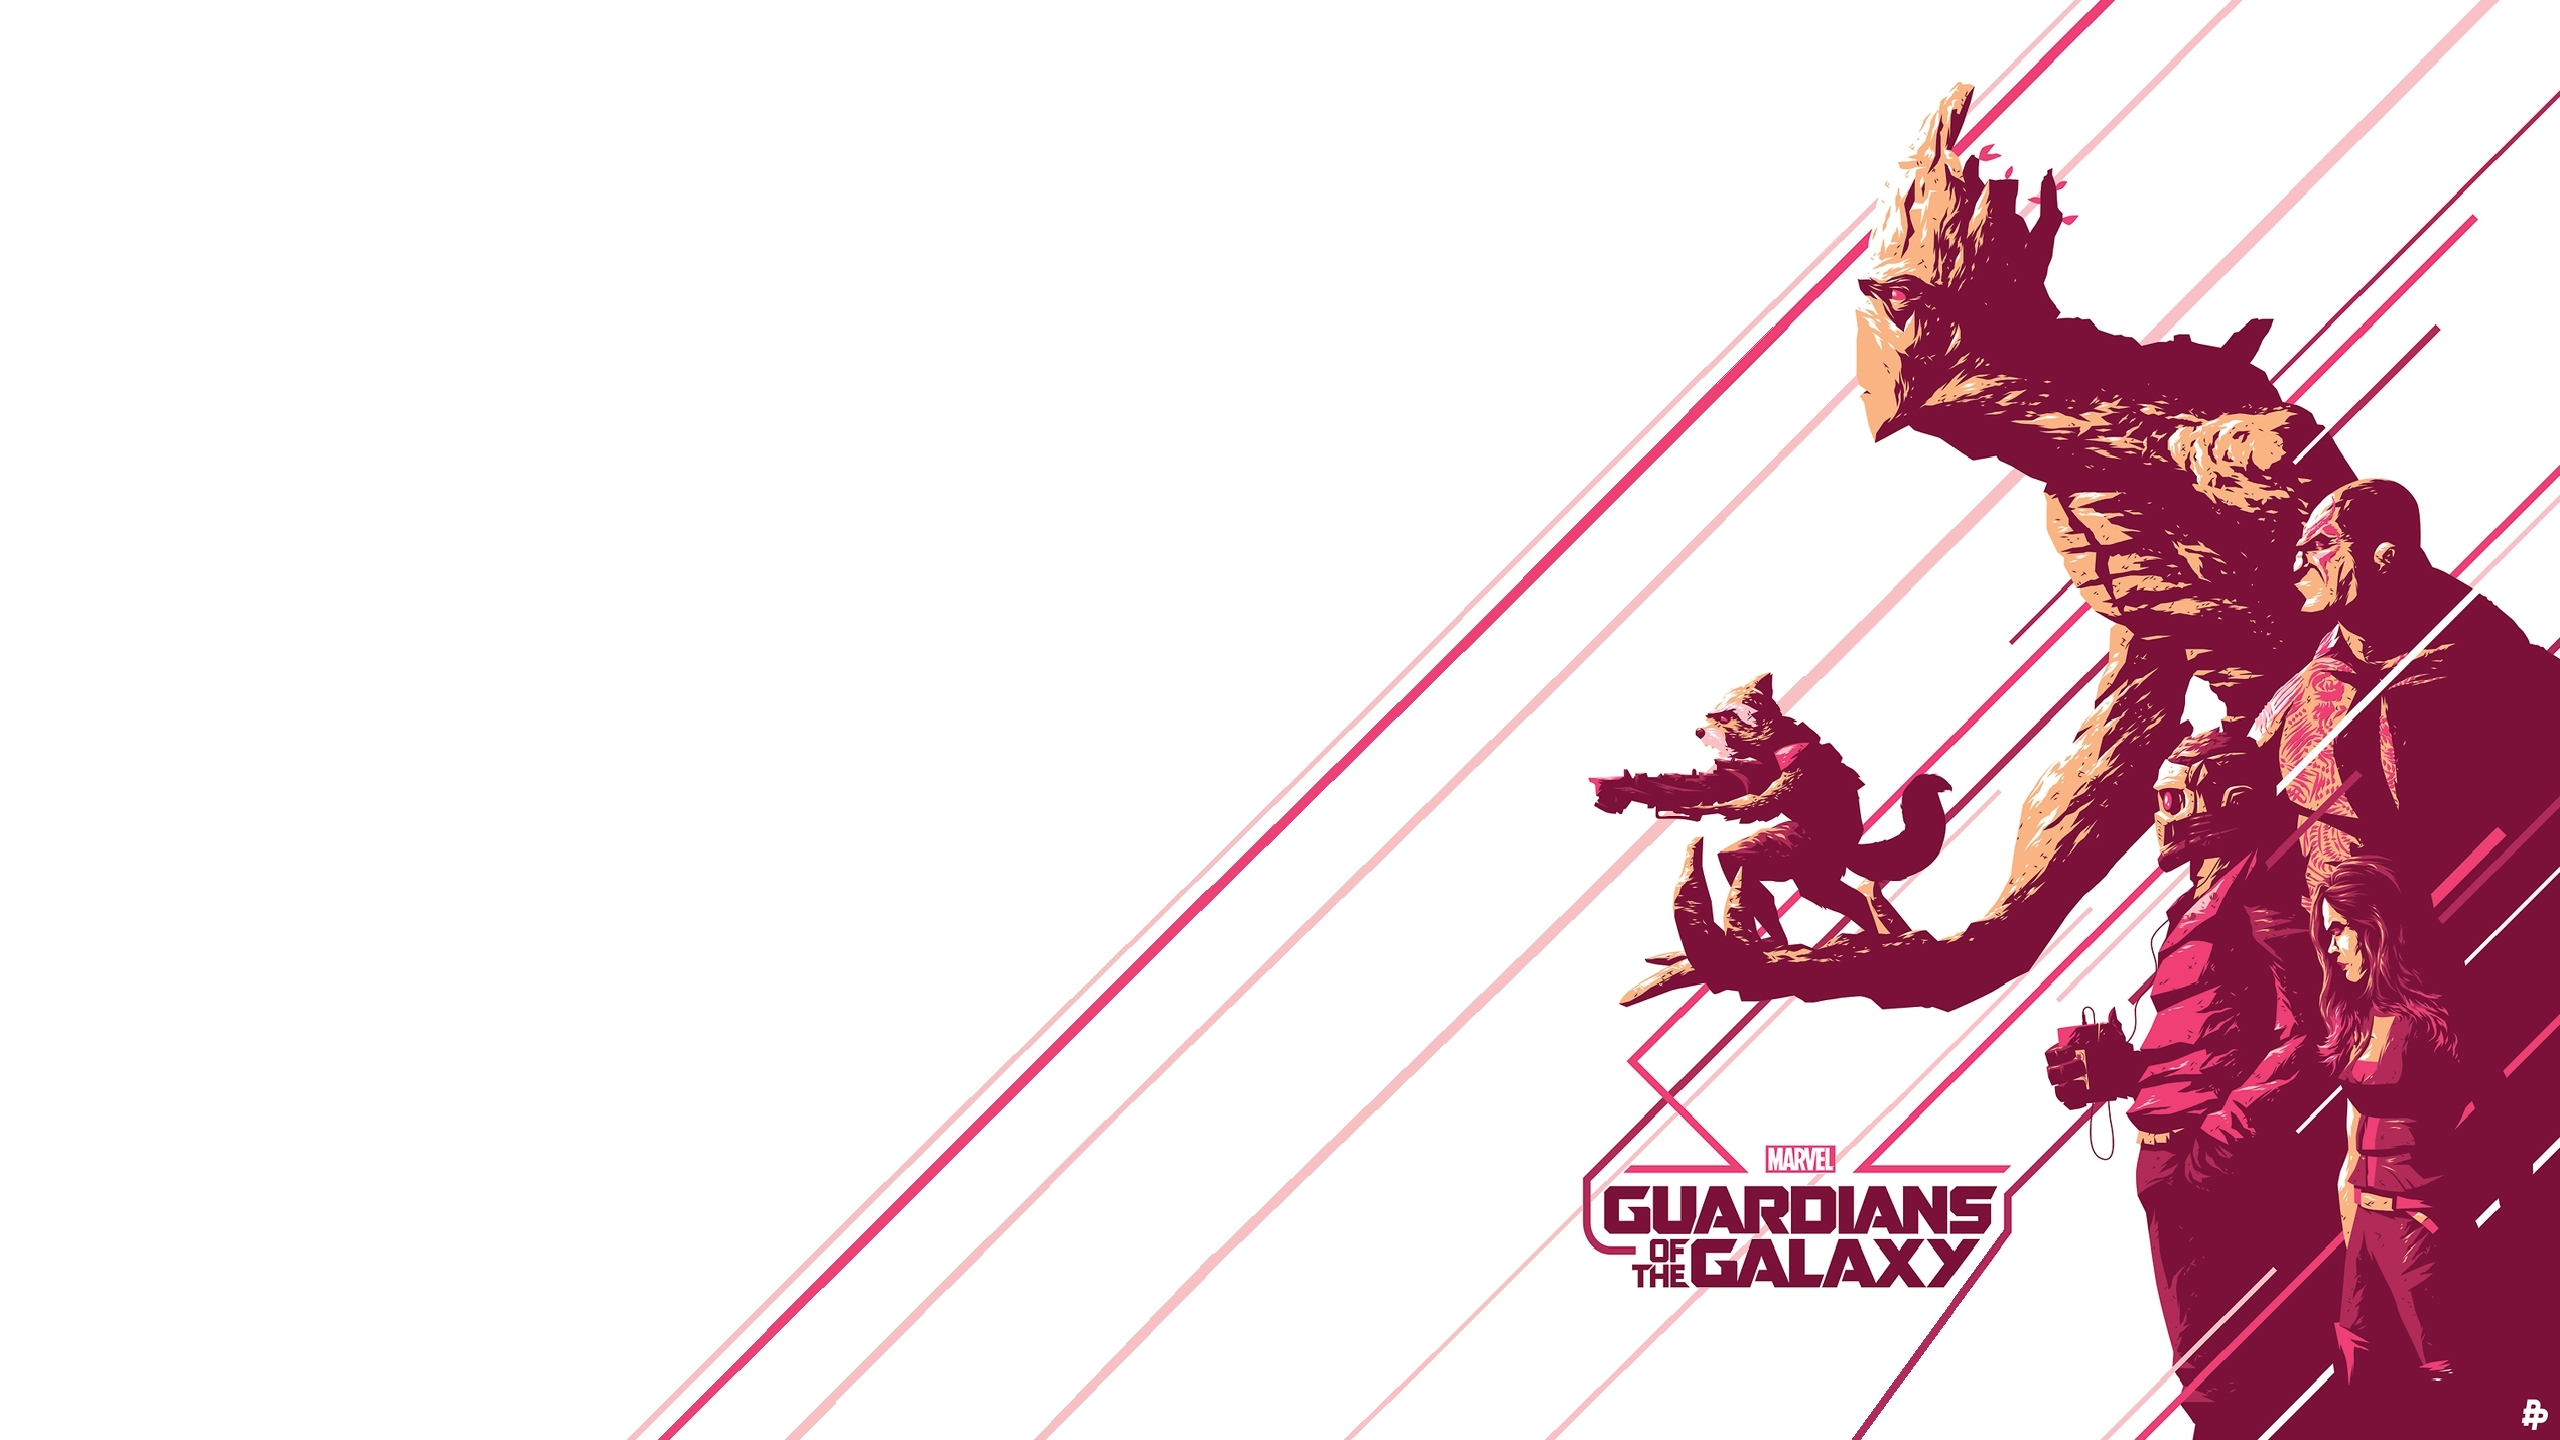 peter quill, guardians of the galaxy, movie, drax the destroyer, gamora, groot, rocket raccoon